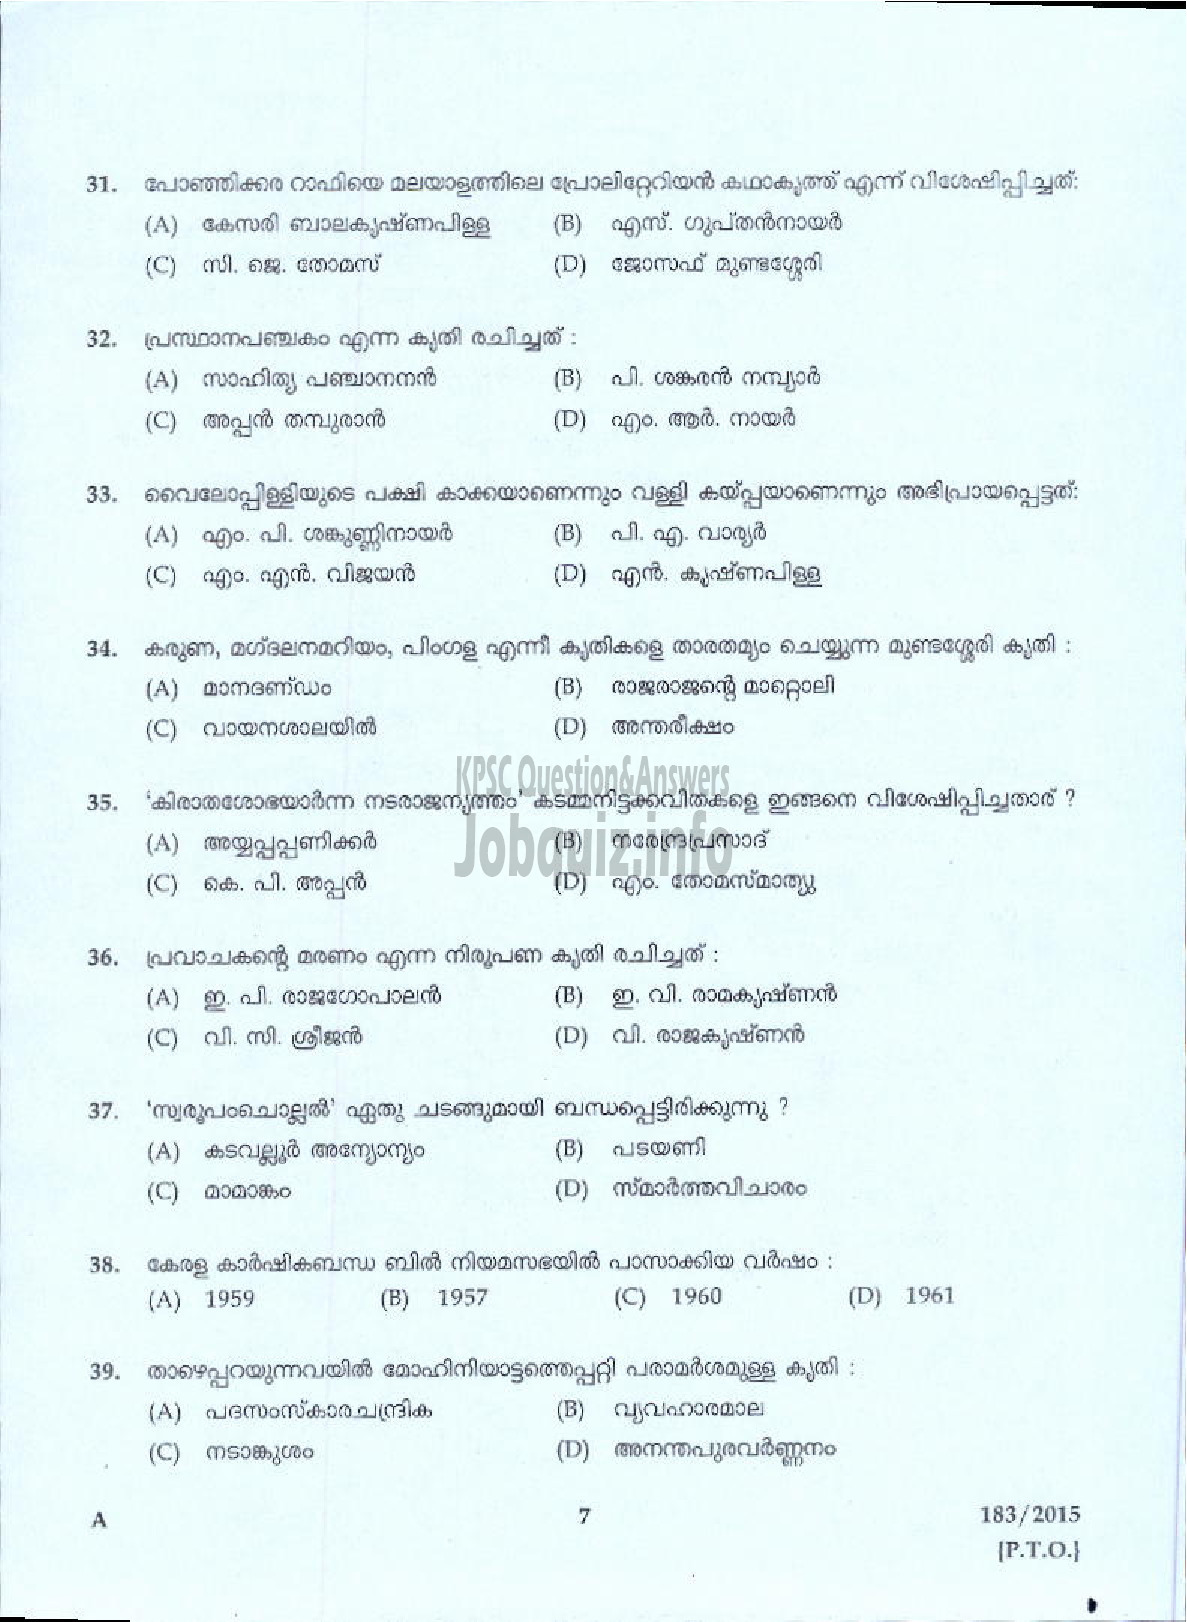 Kerala PSC Question Paper - LECTURER IN MALAYALAM COLLEGIATE EDUCATION-5